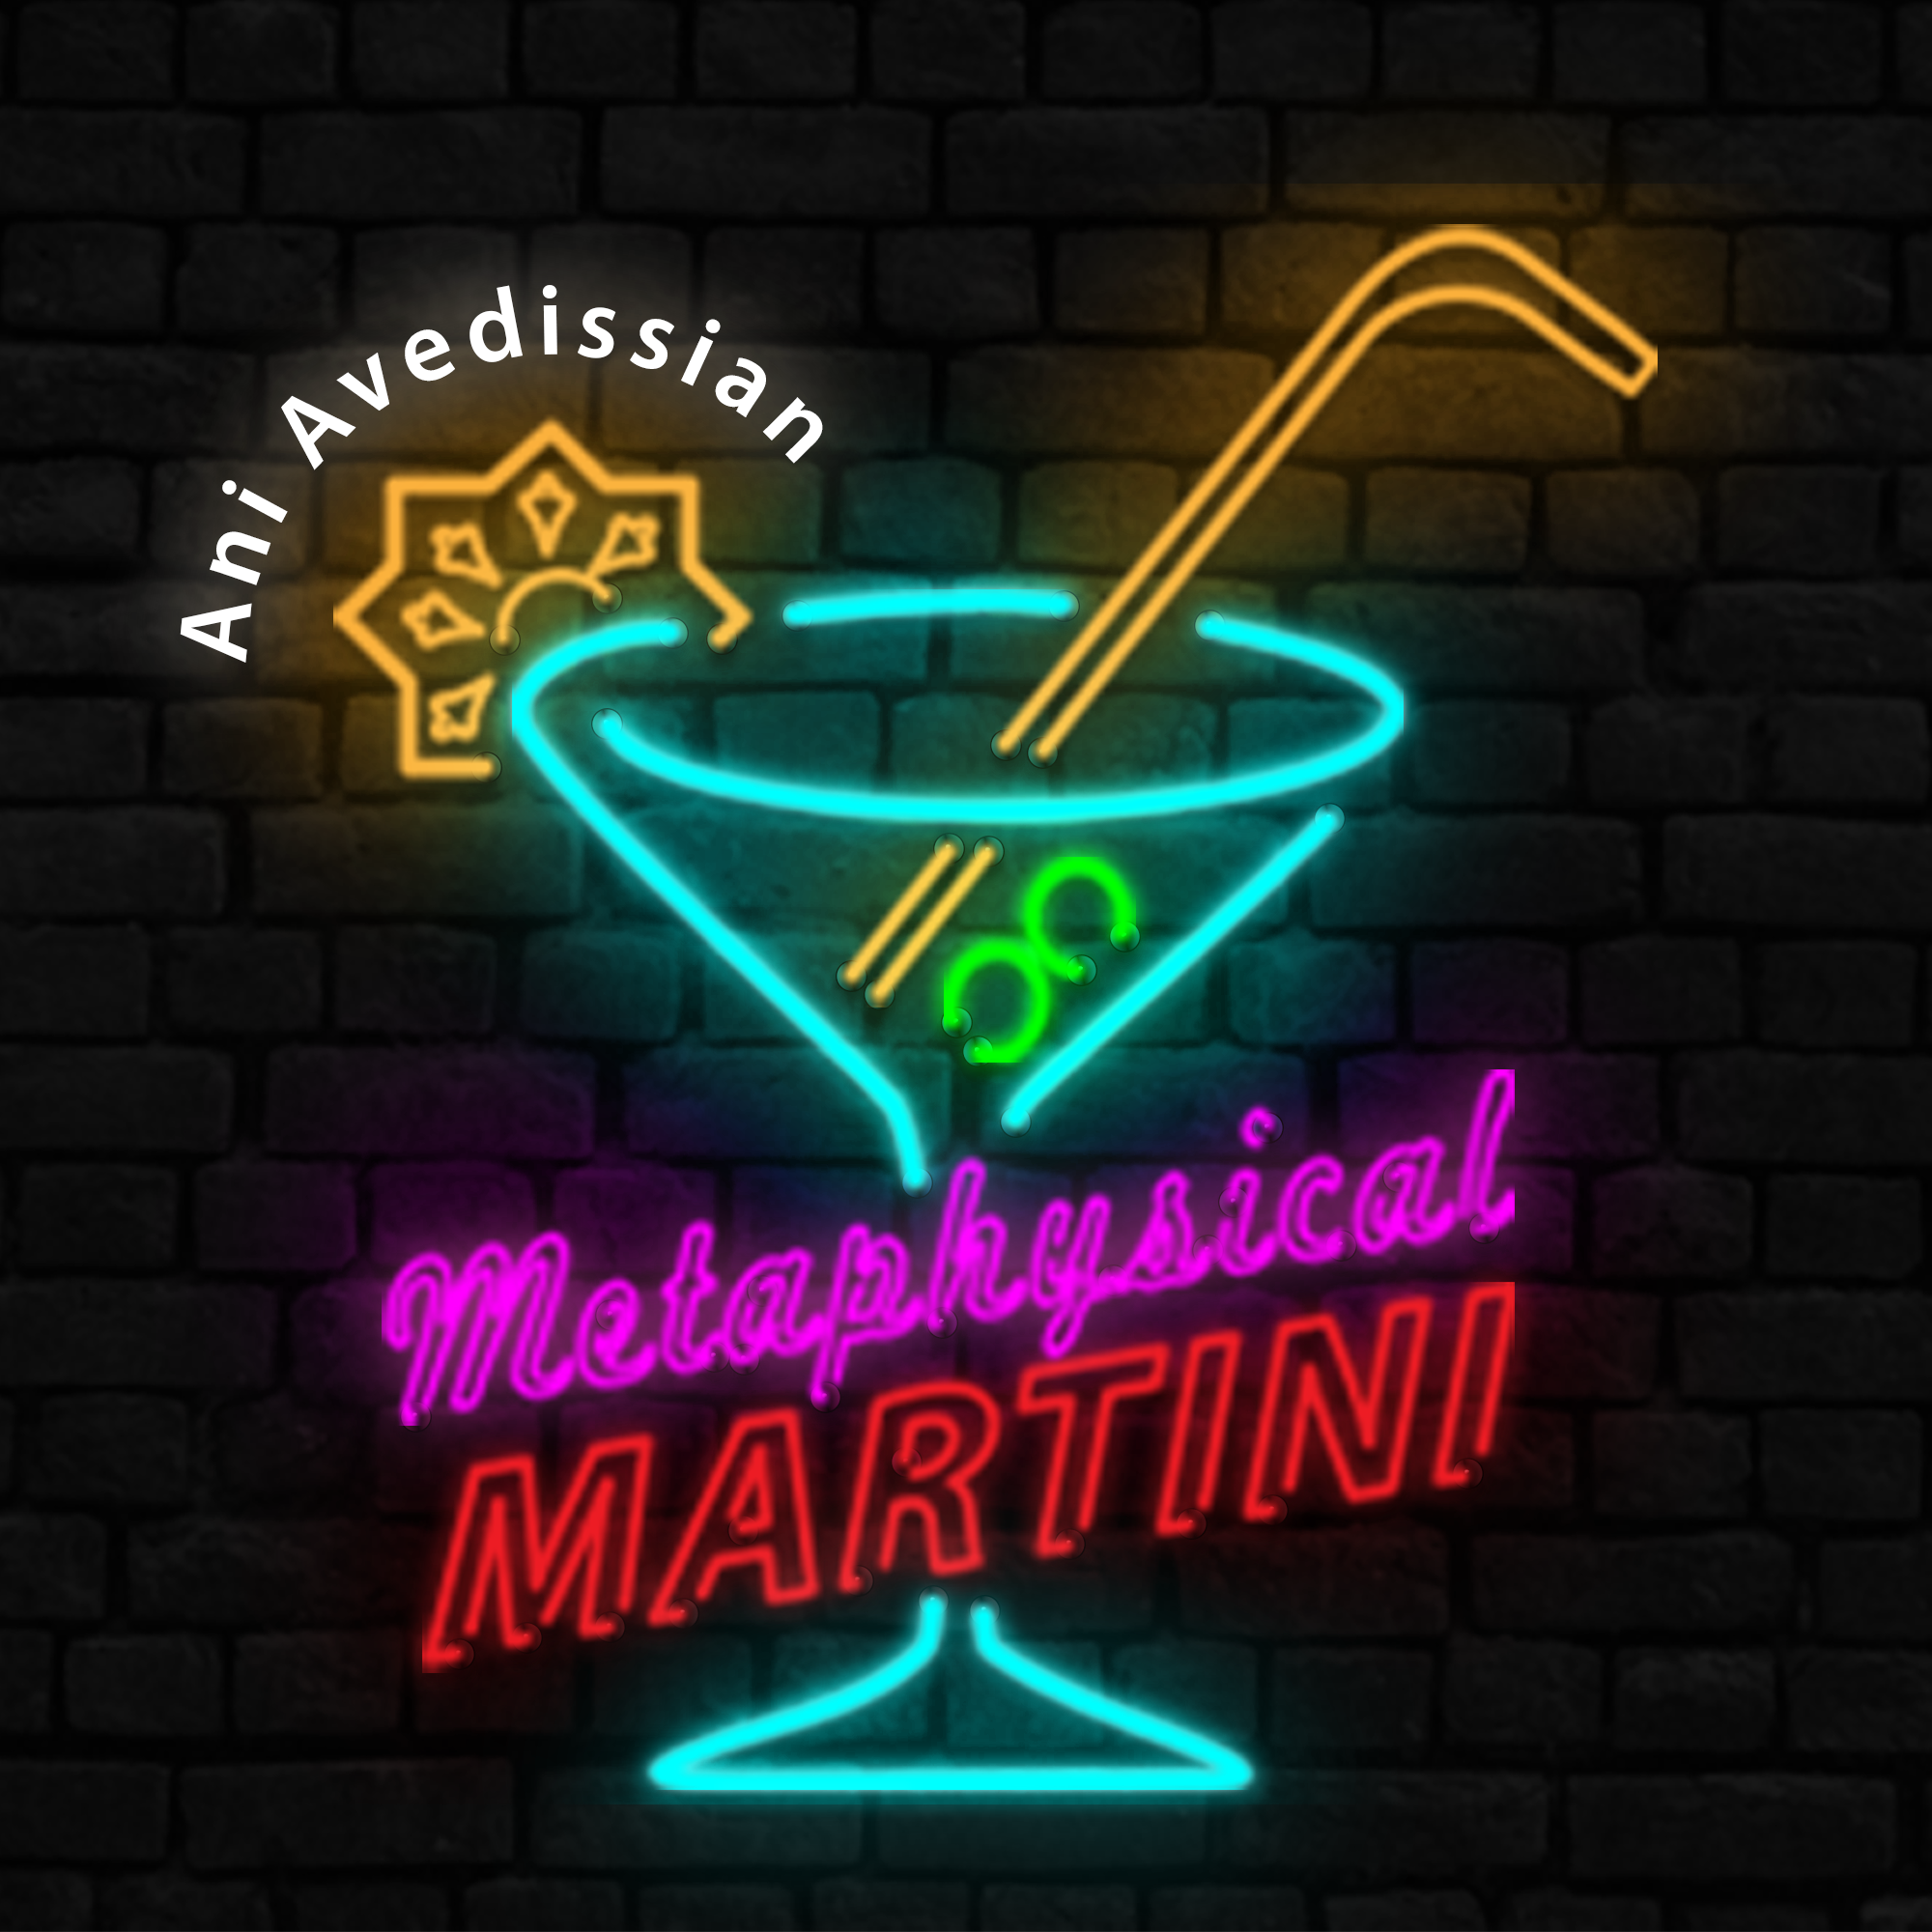 "Metaphysical Martini"   08/03/2022 - Ani pontificates and prattles.    The weak-minded will be rattled.